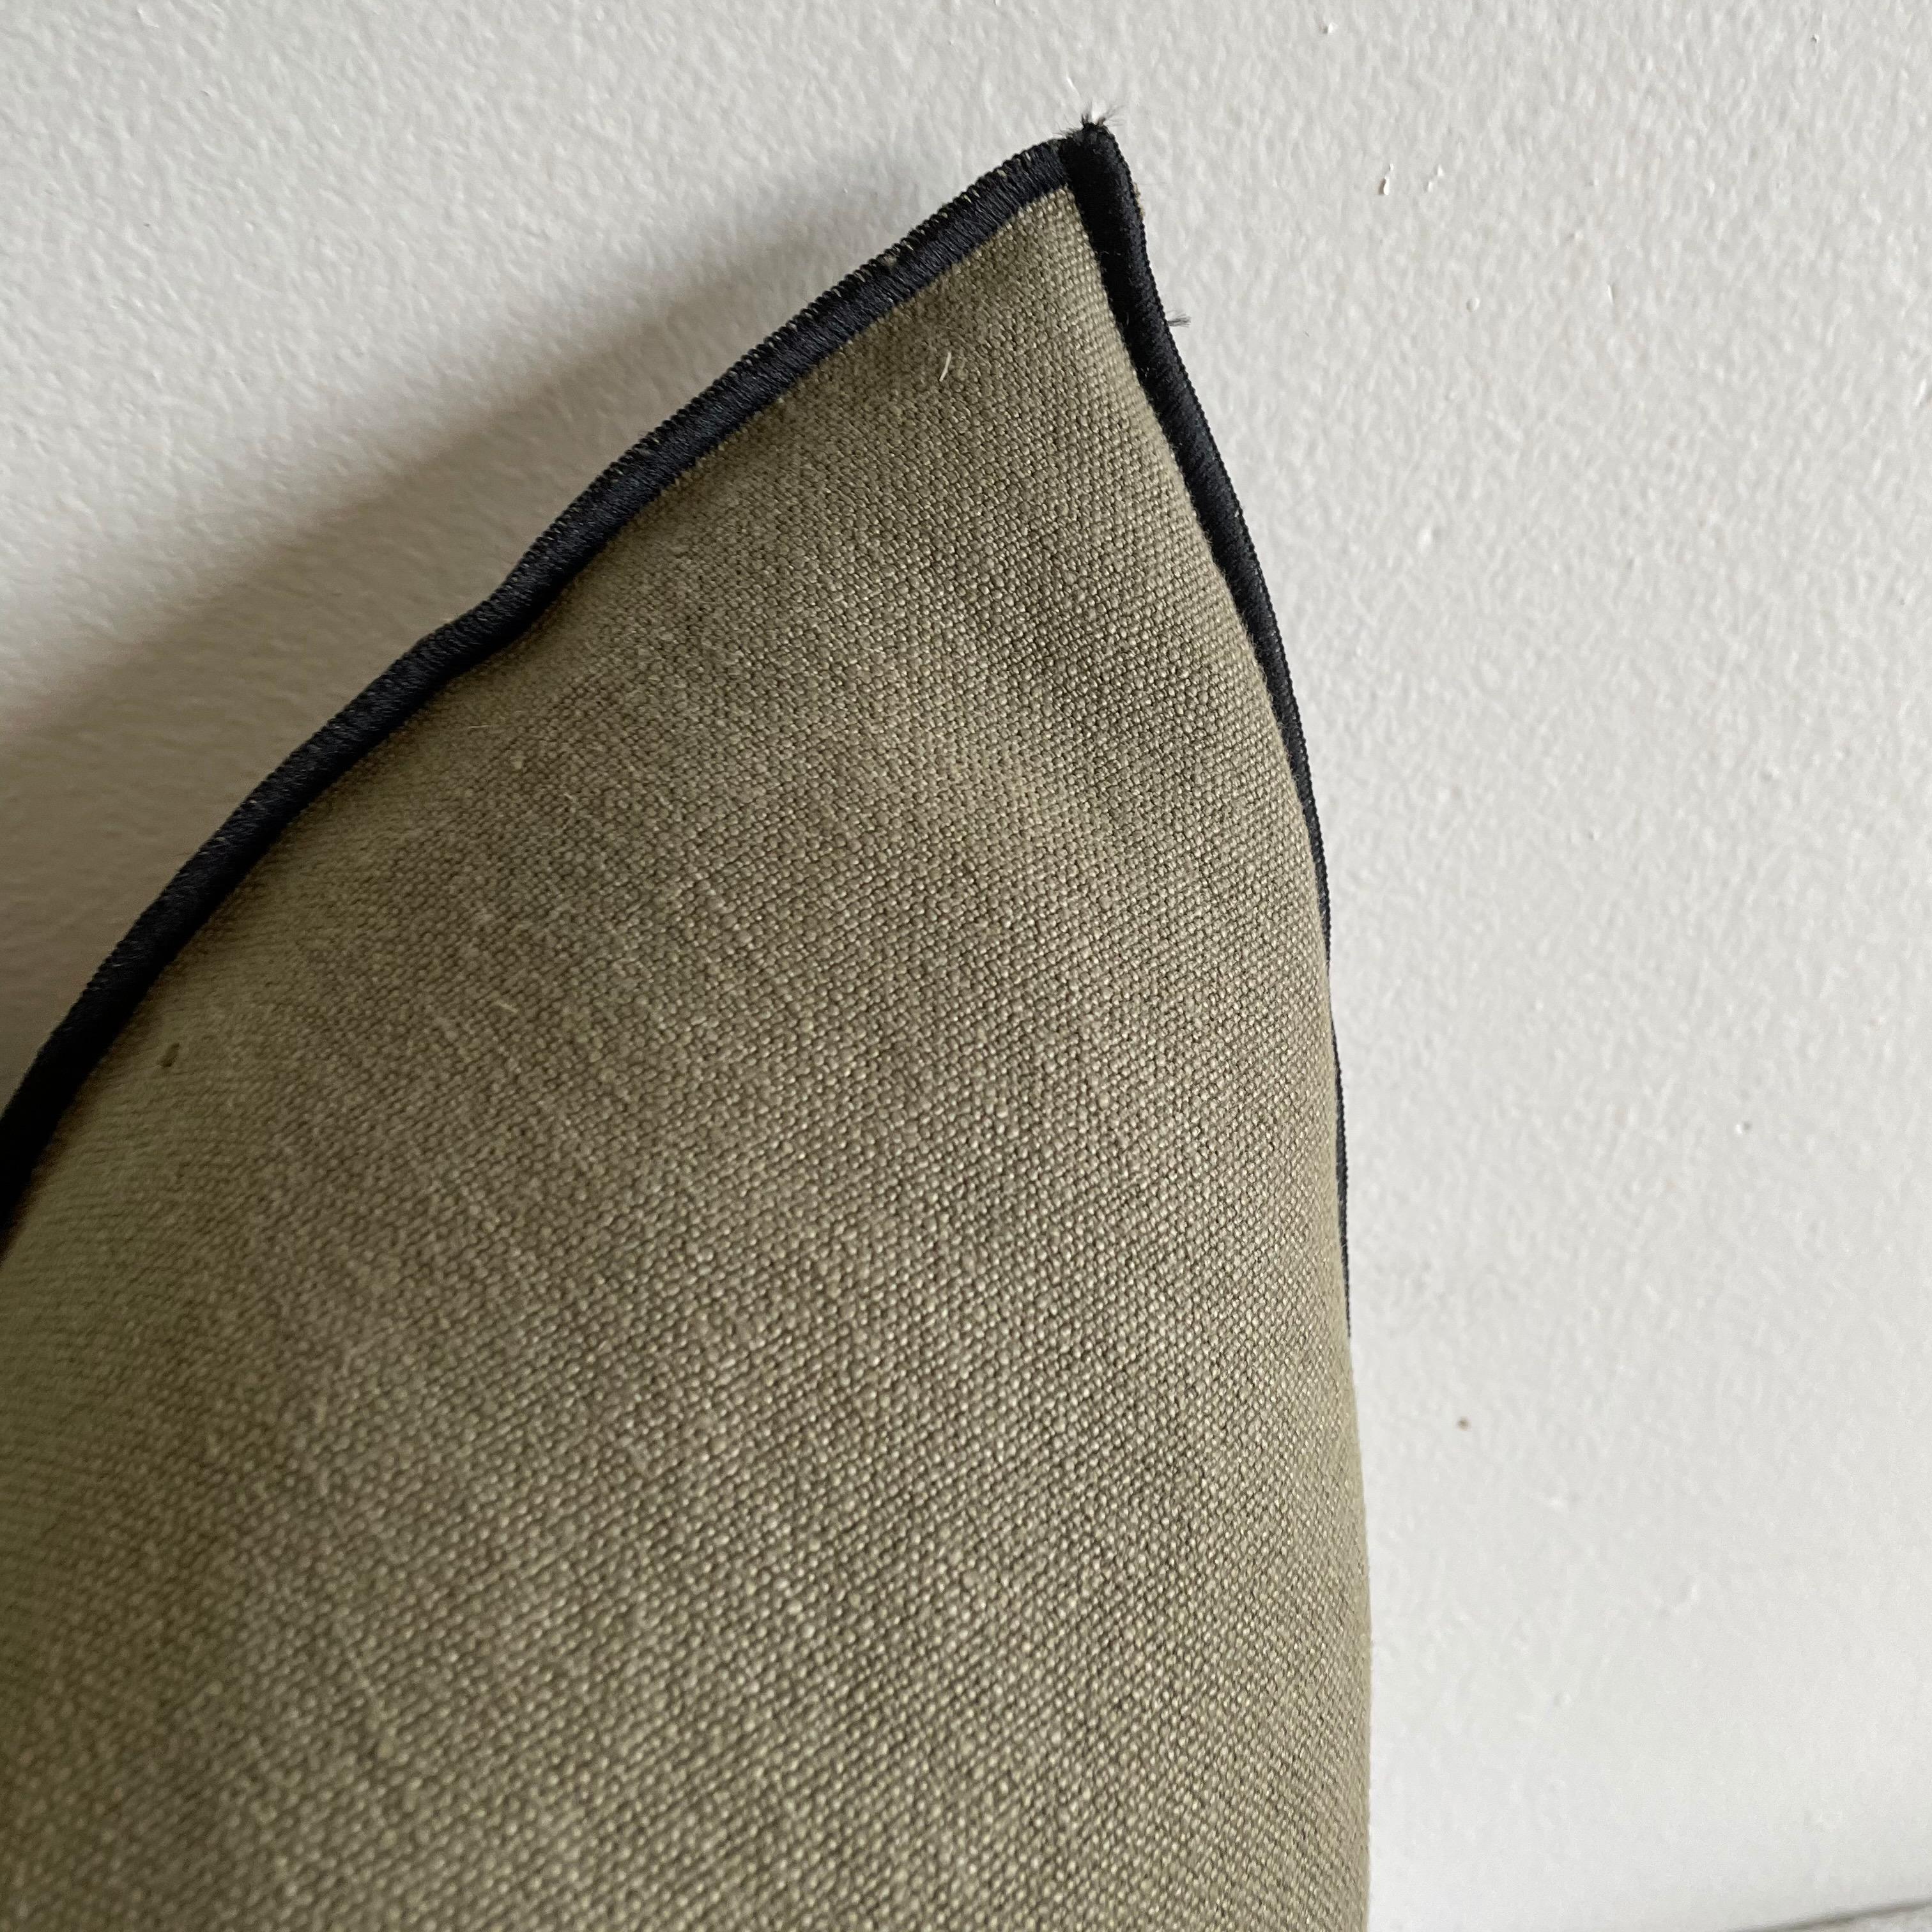 Custom linen blend accent pillow. Color: Kaki A dark green / grey colored nubby textured style pillow with a stitched edge, metal zipper closure. Our pillows are constructed with vintage one of a kind textiles from around the globe. Carefully